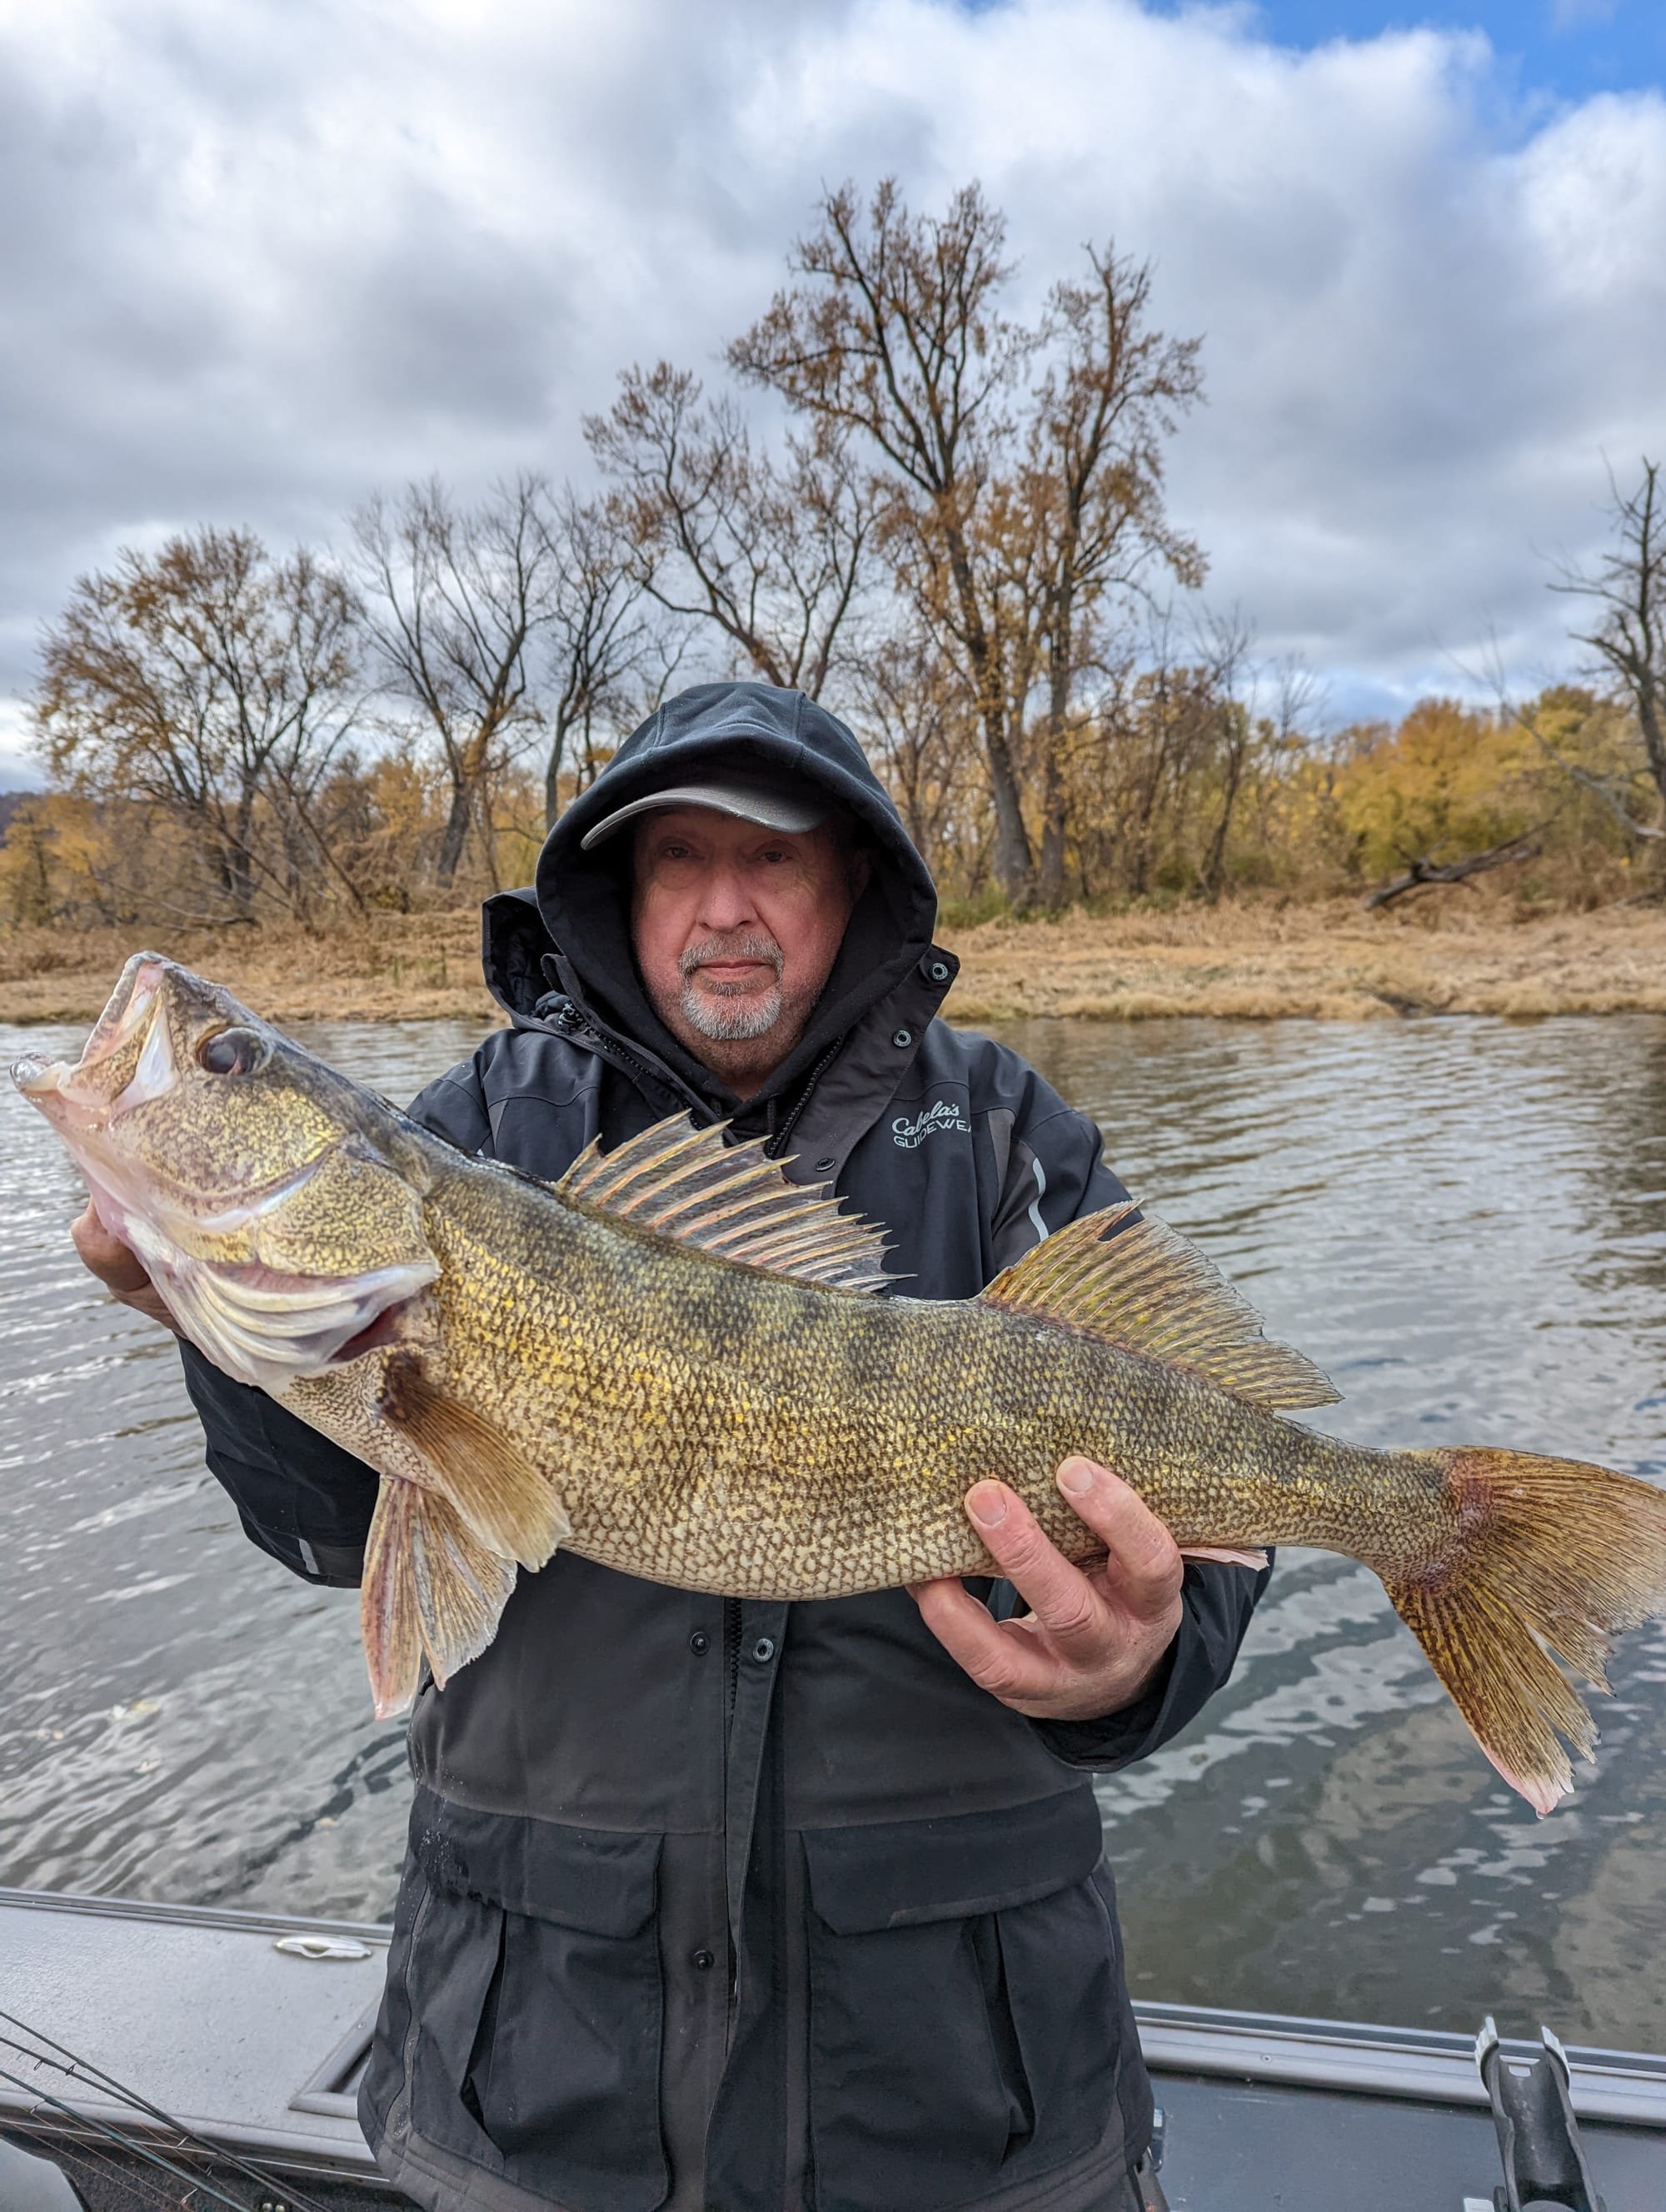 HAHN'S FISHING GUIDE - Hahn's Mississippi River Fishing Guide Service